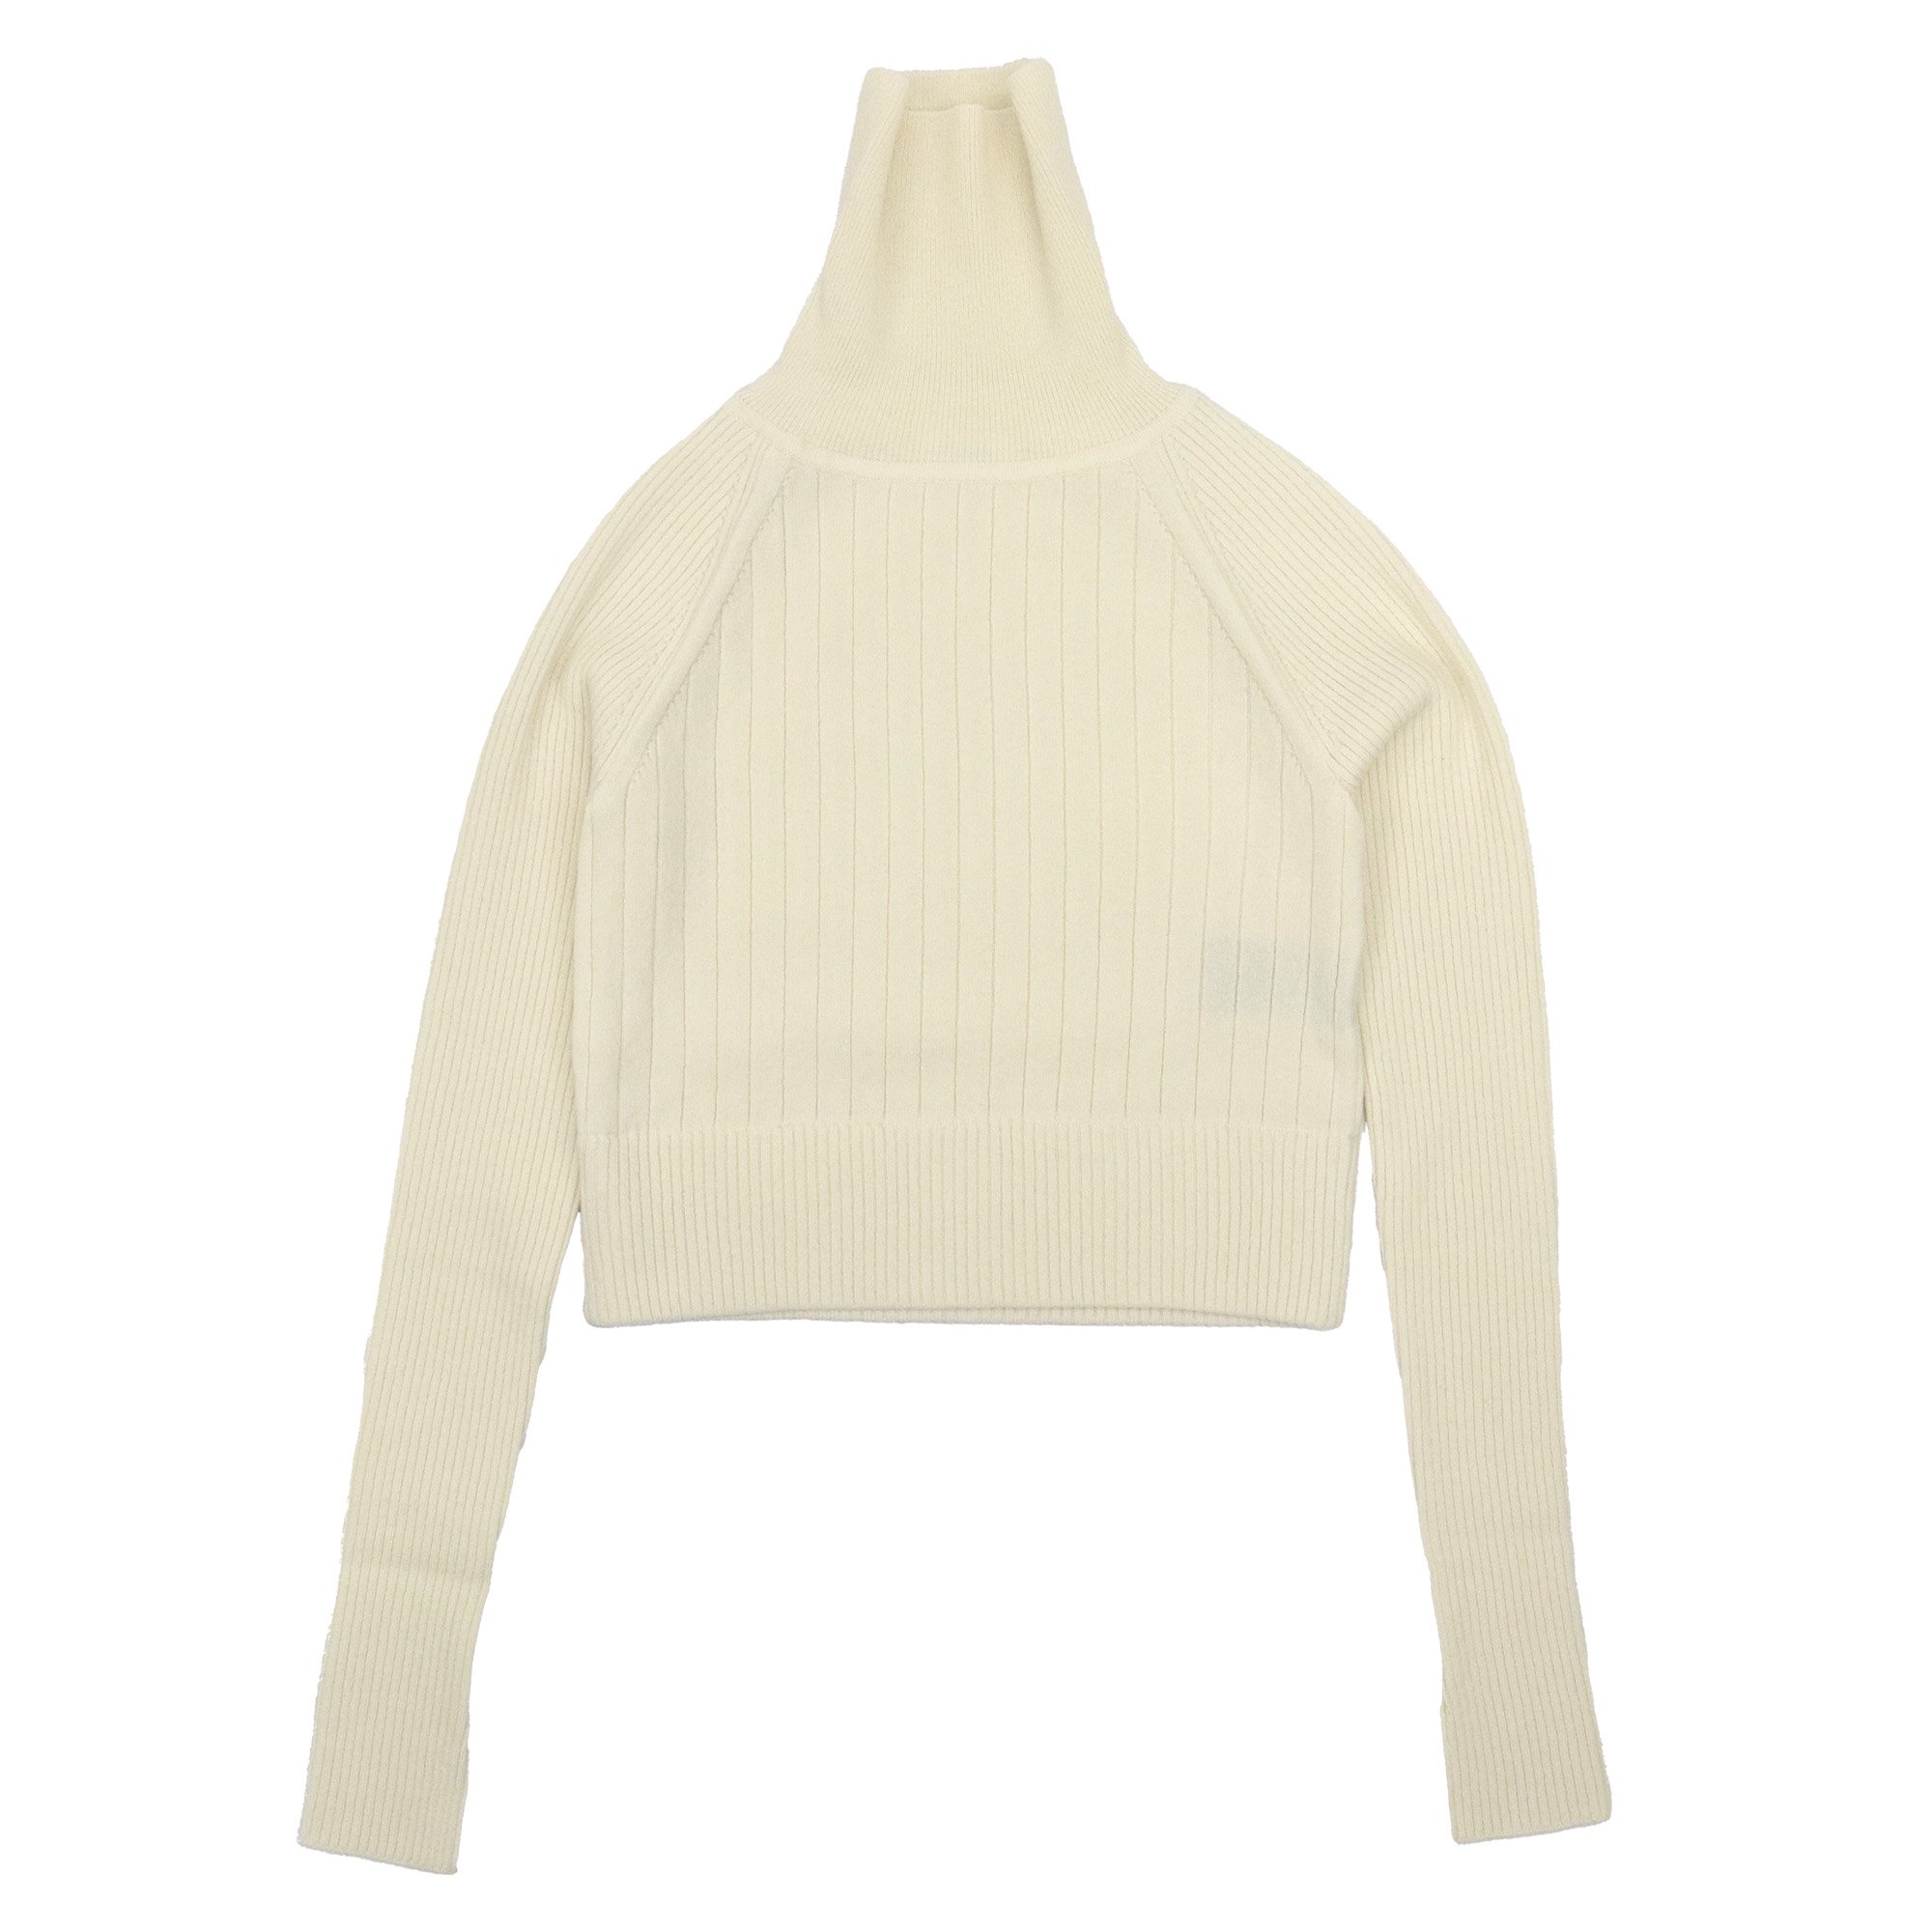 <img class='new_mark_img1' src='https://img.shop-pro.jp/img/new/icons47.gif' style='border:none;display:inline;margin:0px;padding:0px;width:auto;' />THE RERACS BULKY WOOL/CASHMERE RAGLAN TURTLE NECK SHORT PULLOVER KNITECRU